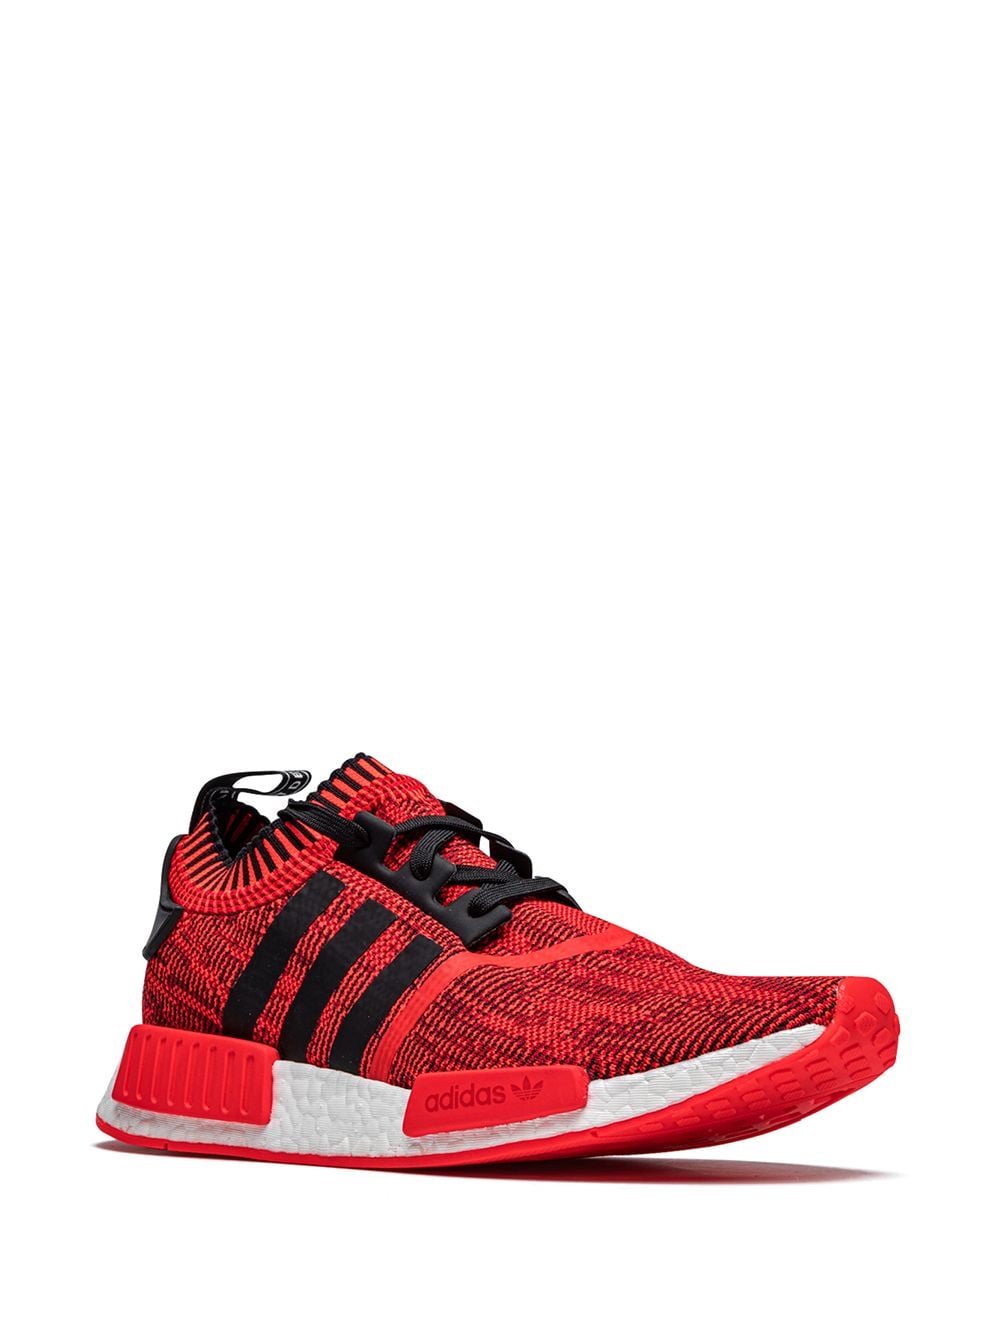 Shop Adidas Originals Nmd_r1 Primeknit "a.i. Camo Pack" Sneakers In Red